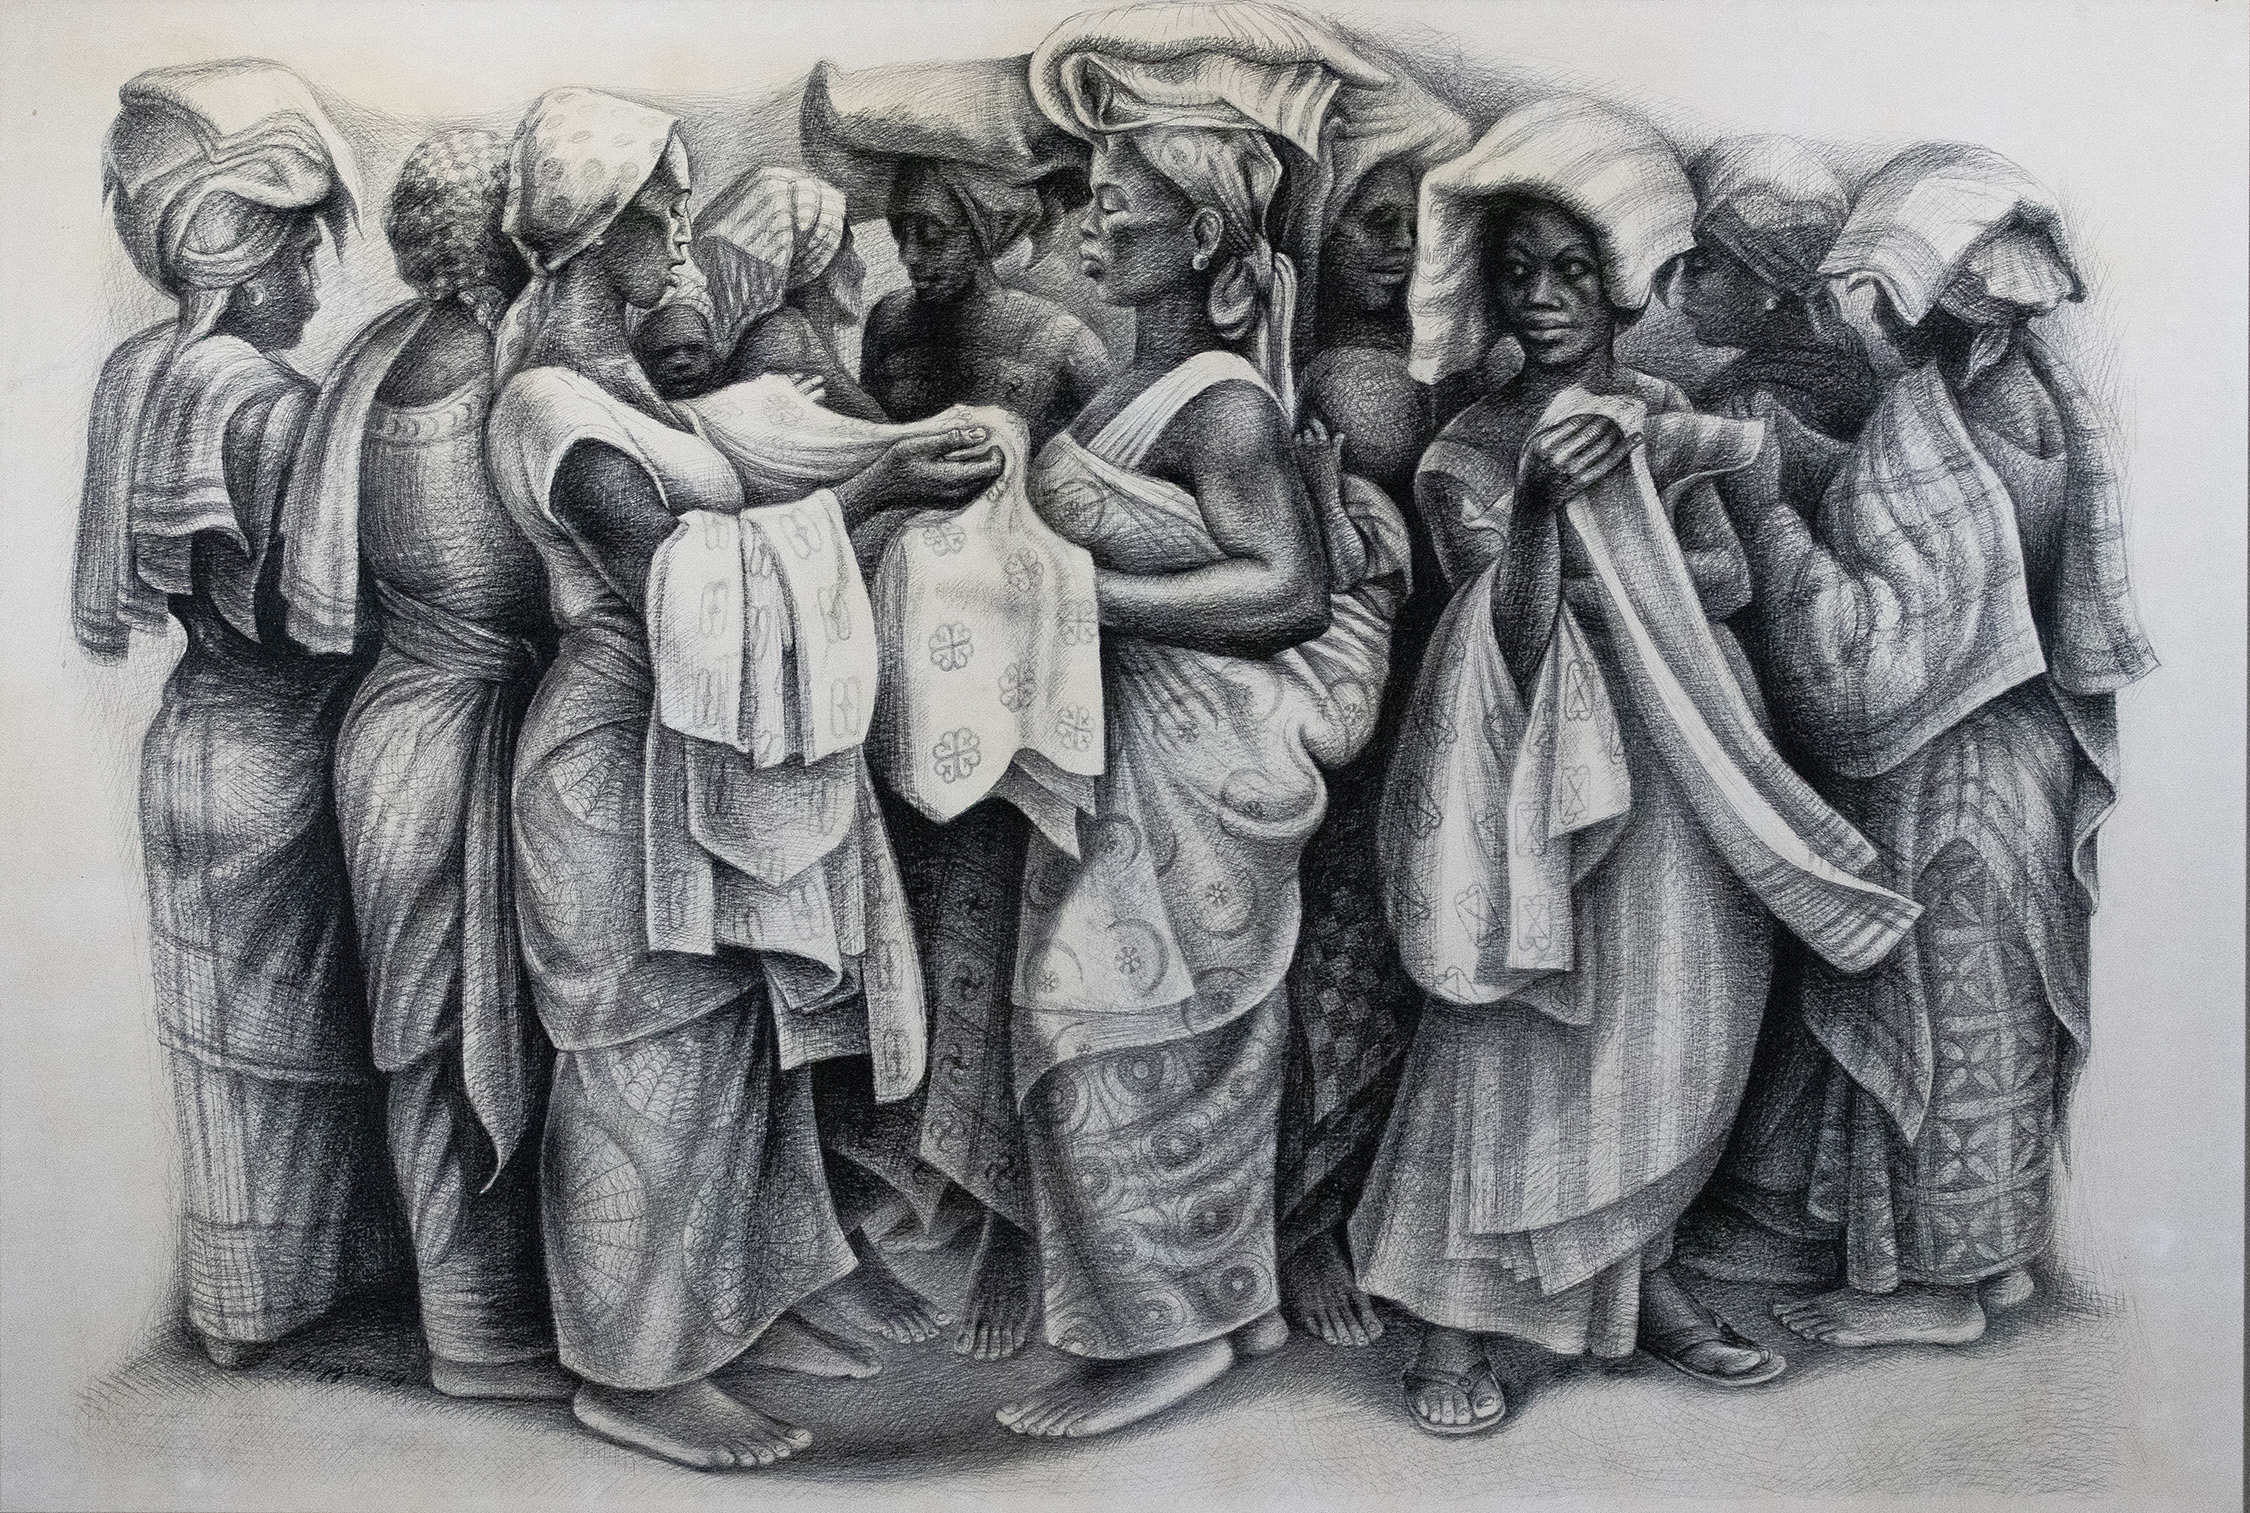 A Monumental Drawing By John Biggers.